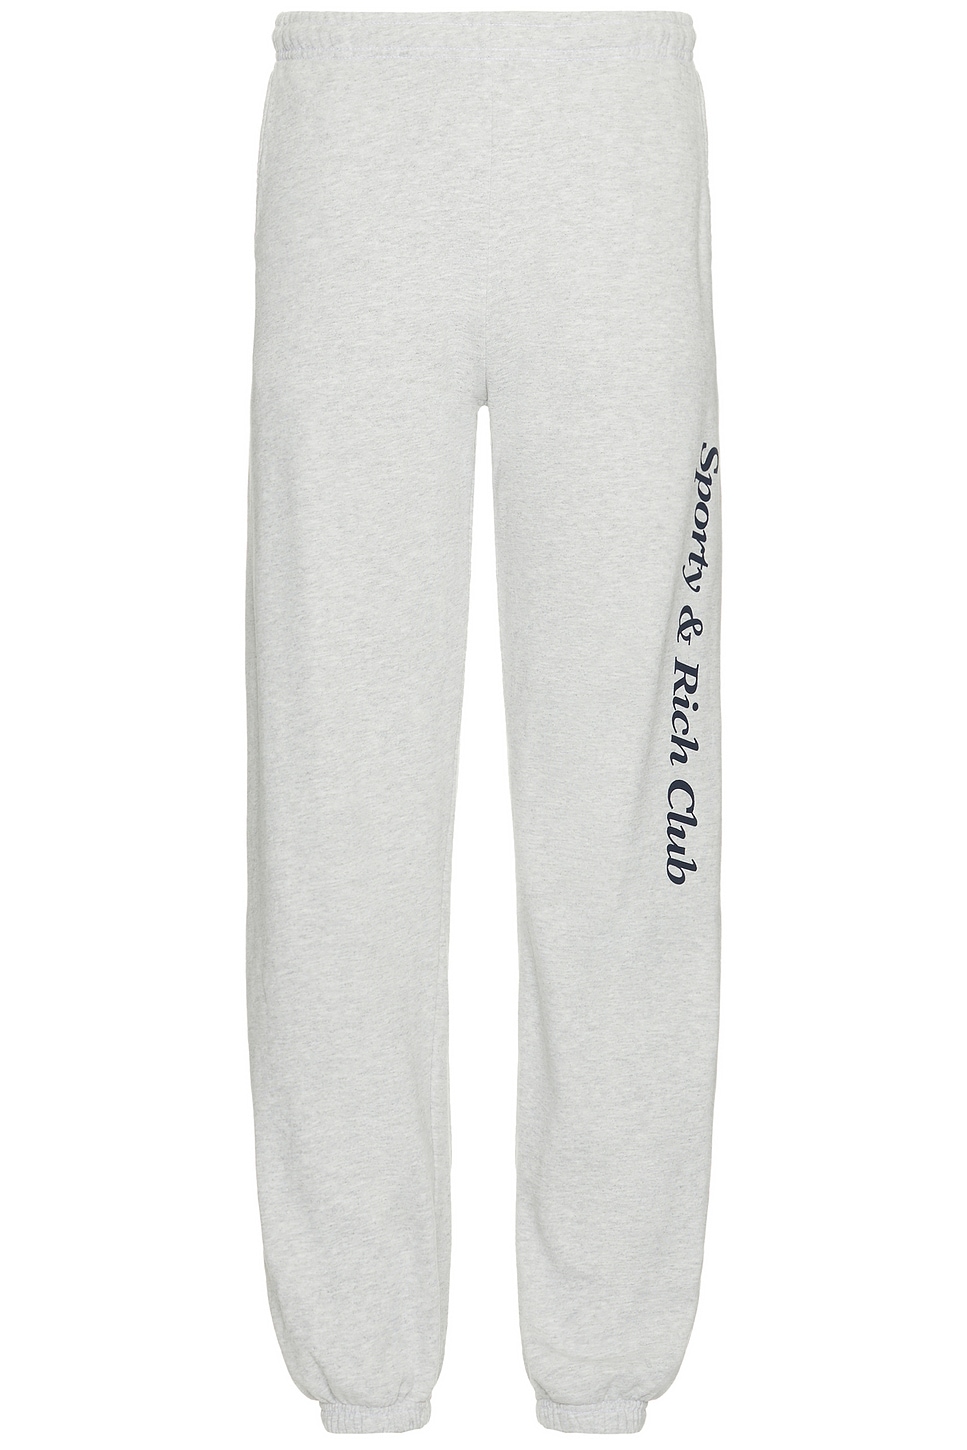 Image 1 of Sporty & Rich Starter Sweatpants in Heather Grey & Navy